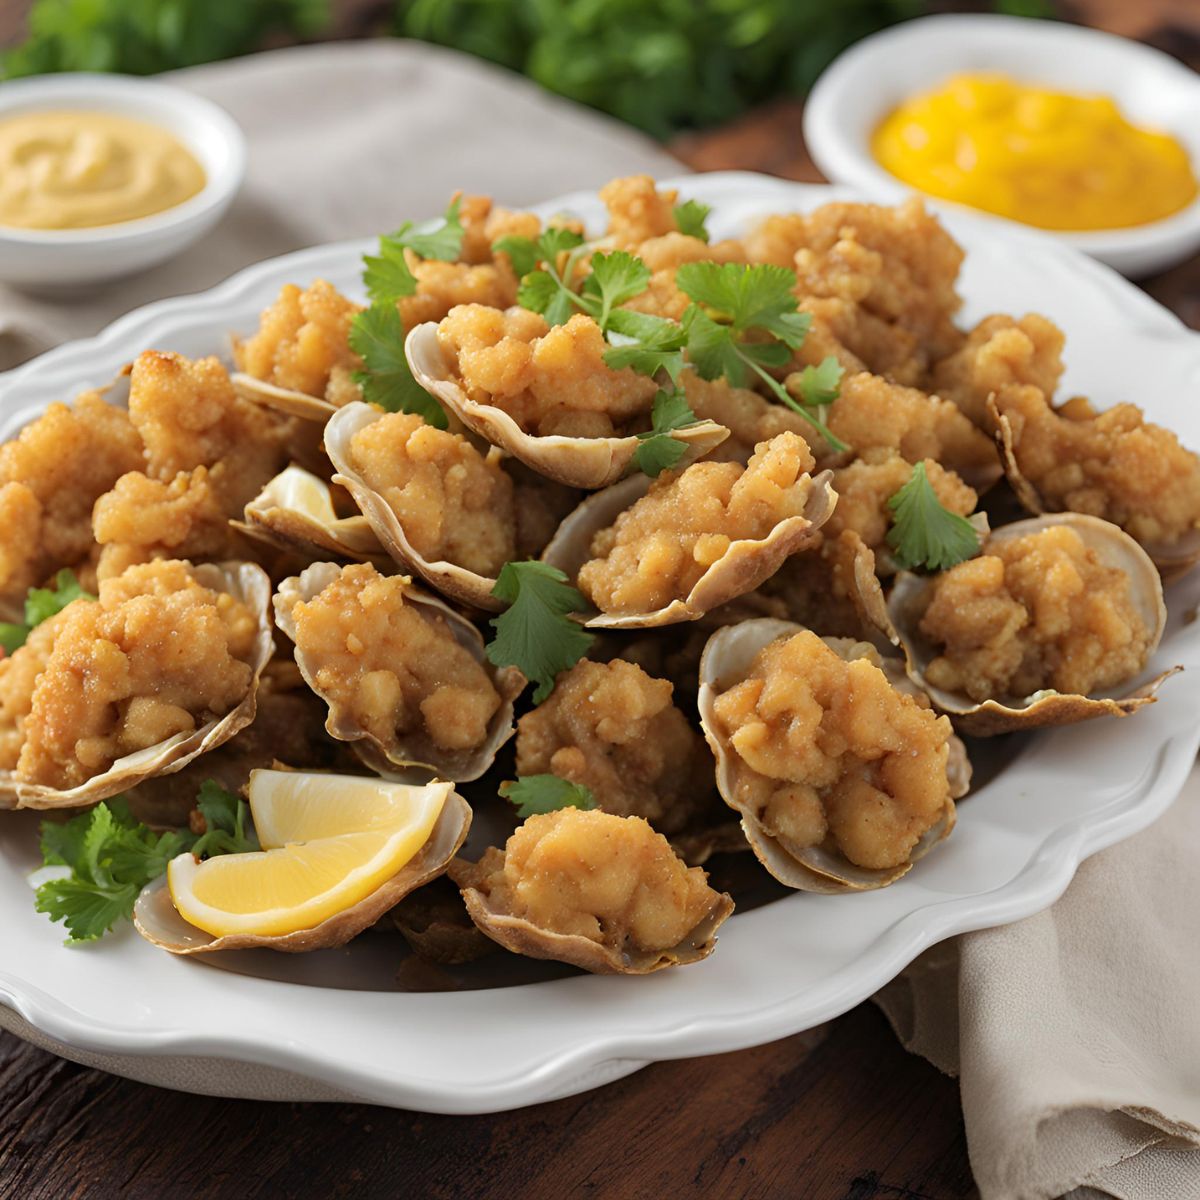 Fried Clams Recipe: Perfectly Crunchy and Flavorful!